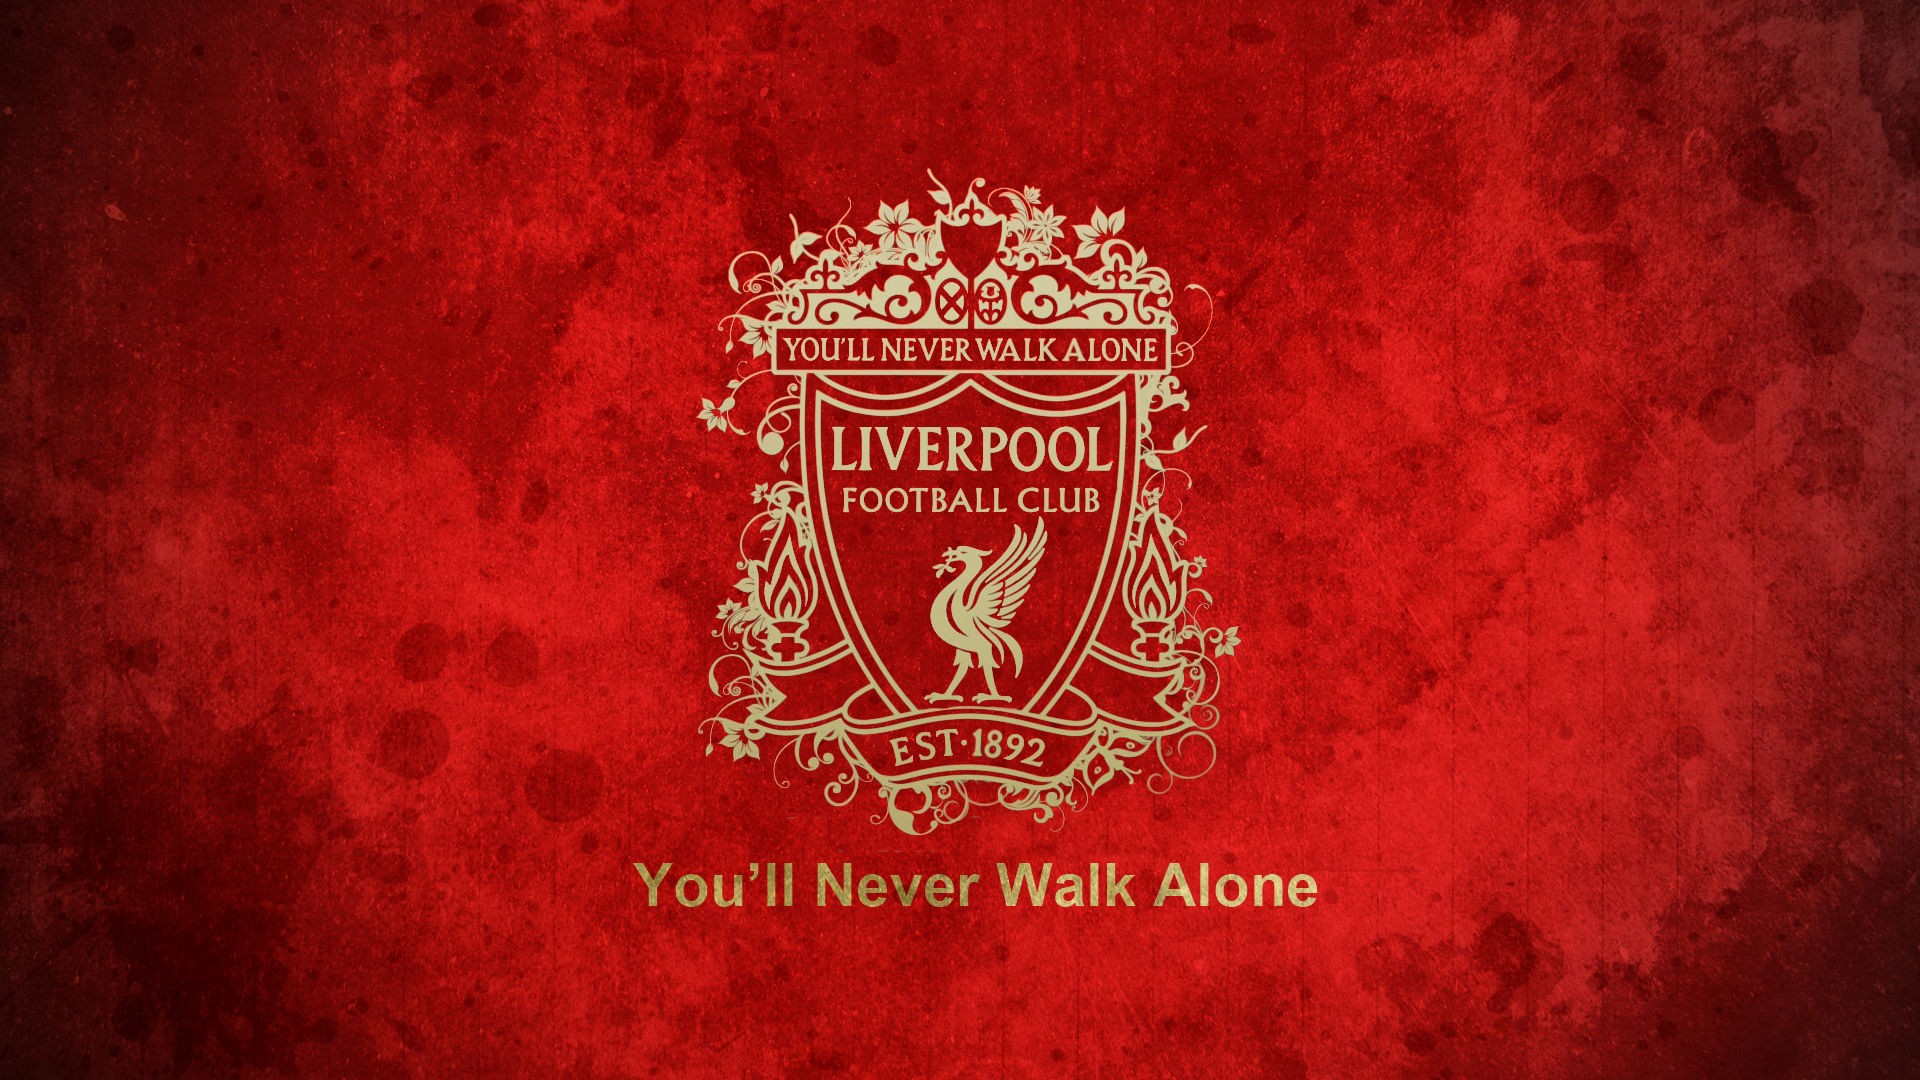 Wallpapers Liverpool with resolution 1920x1080 pixel. You can make this wallpaper for your Mac or Windows Desktop Background, iPhone, Android or Tablet and another Smartphone device